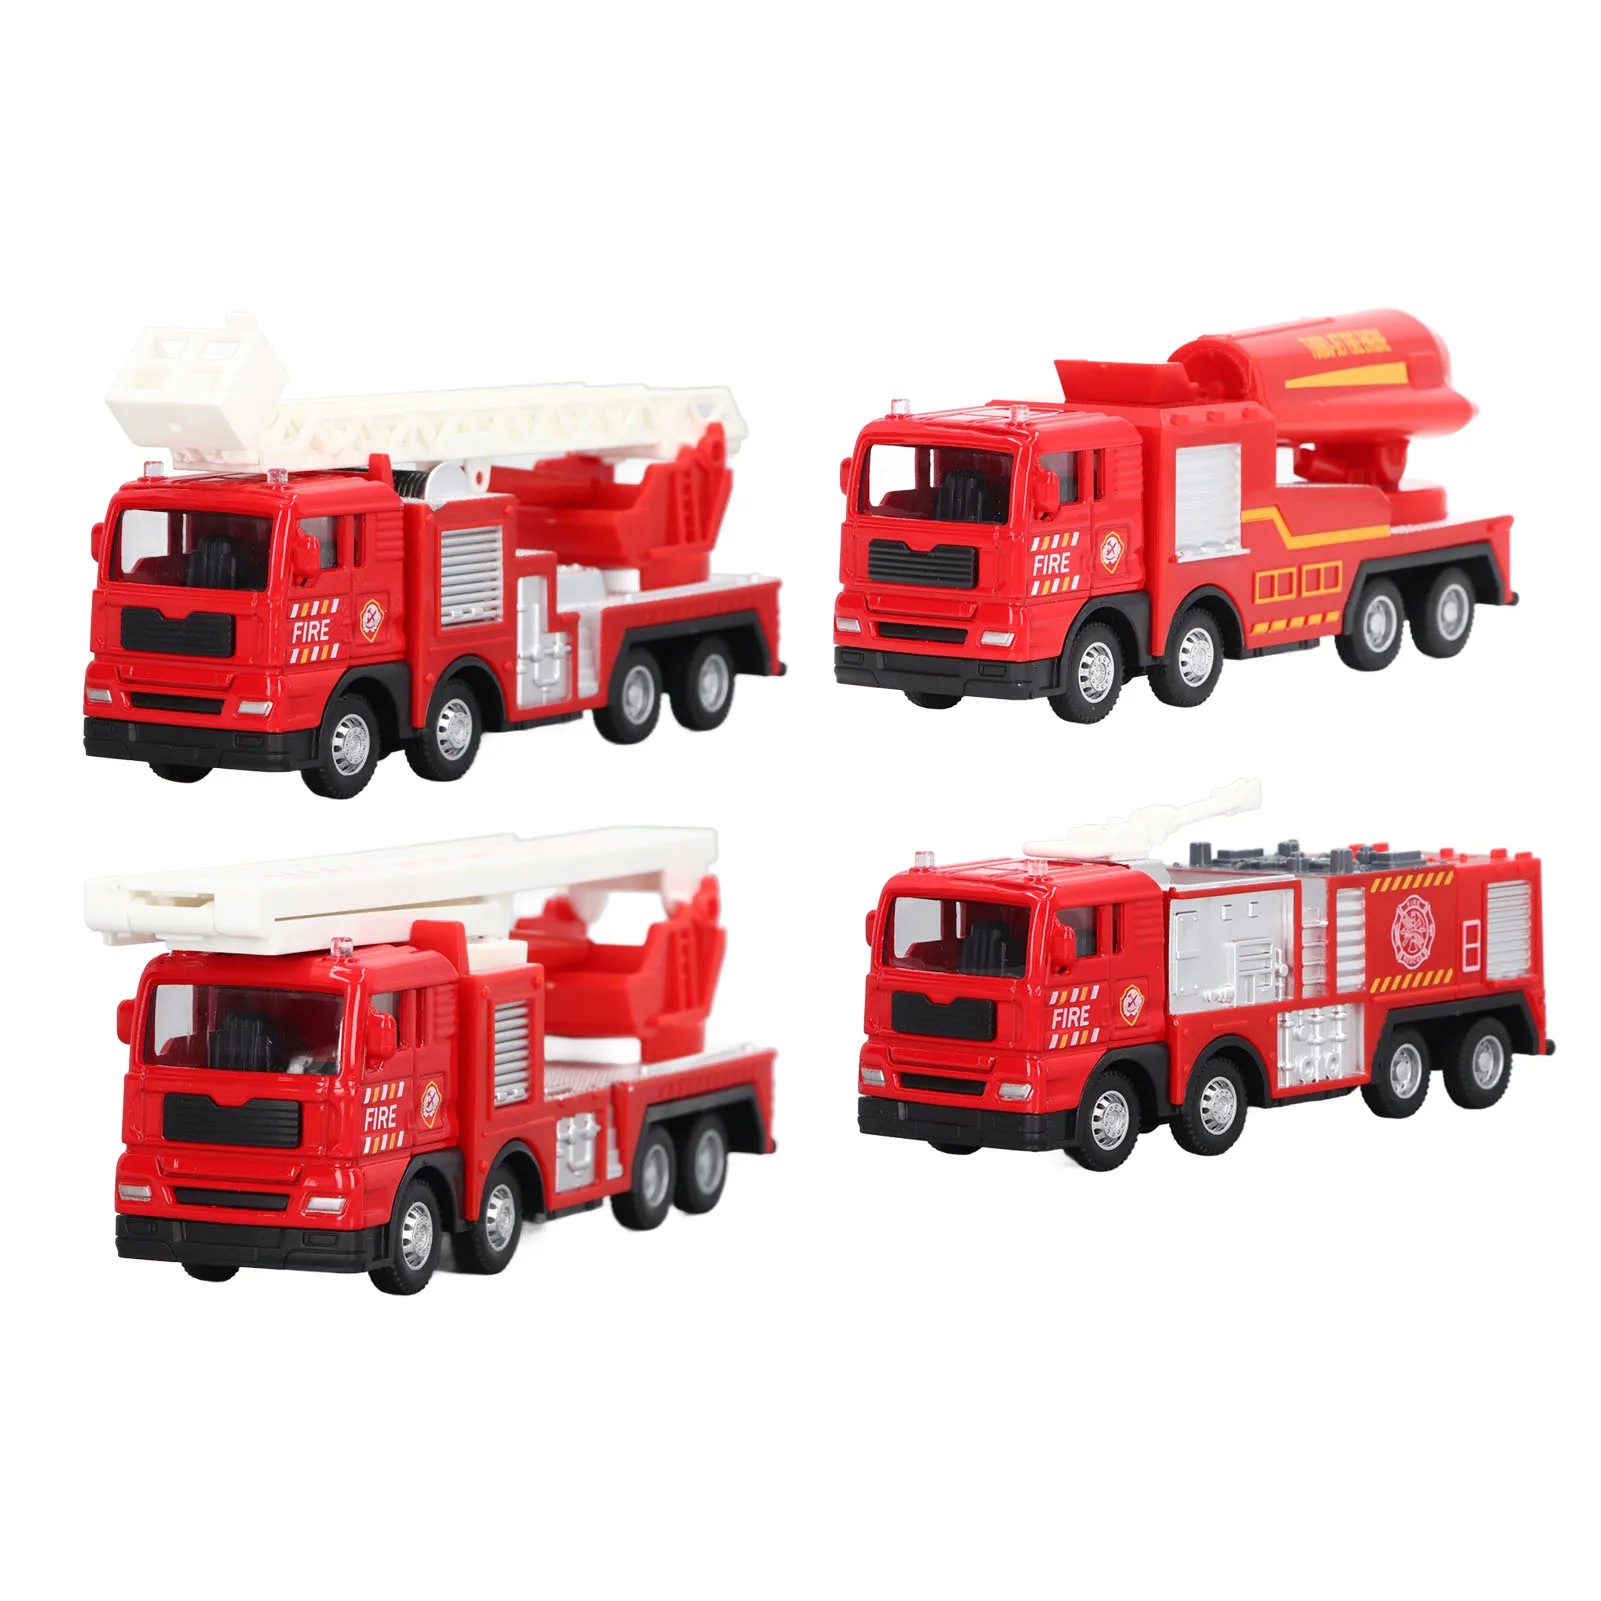 1:55 Fire Truck Toy Alloy Simulation Fire Ladder Truck Sprinkler Truck Tower Crane Toy For Home Decoration Birthday Gift humidifier super strong portable 180ml fire flame humidifier aroma diffuser for home office and decoration